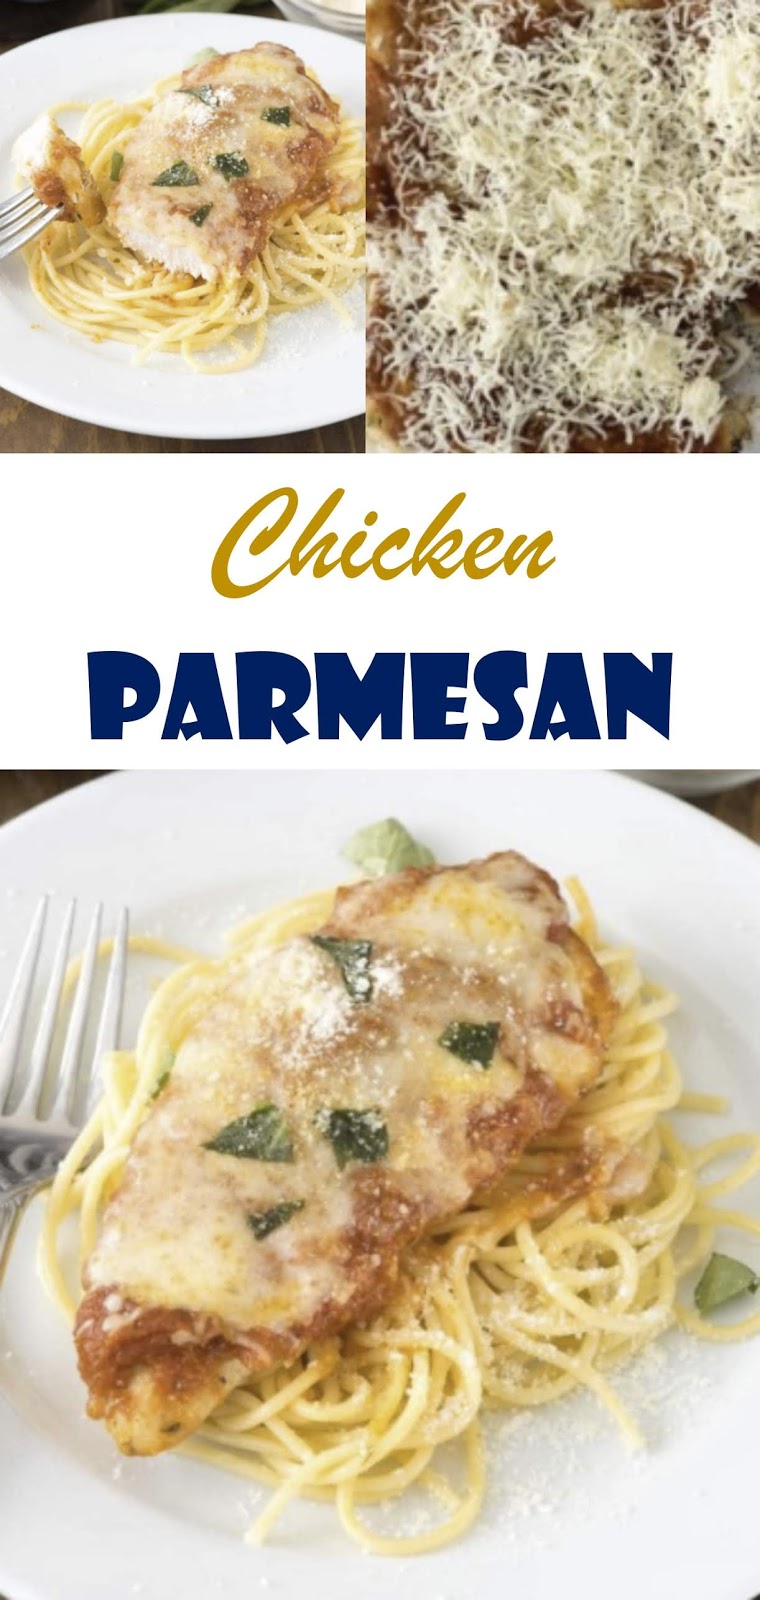 1441 Reviews: THE BEST EVER #Recipes >> CHICKEN PARMESAN - ....